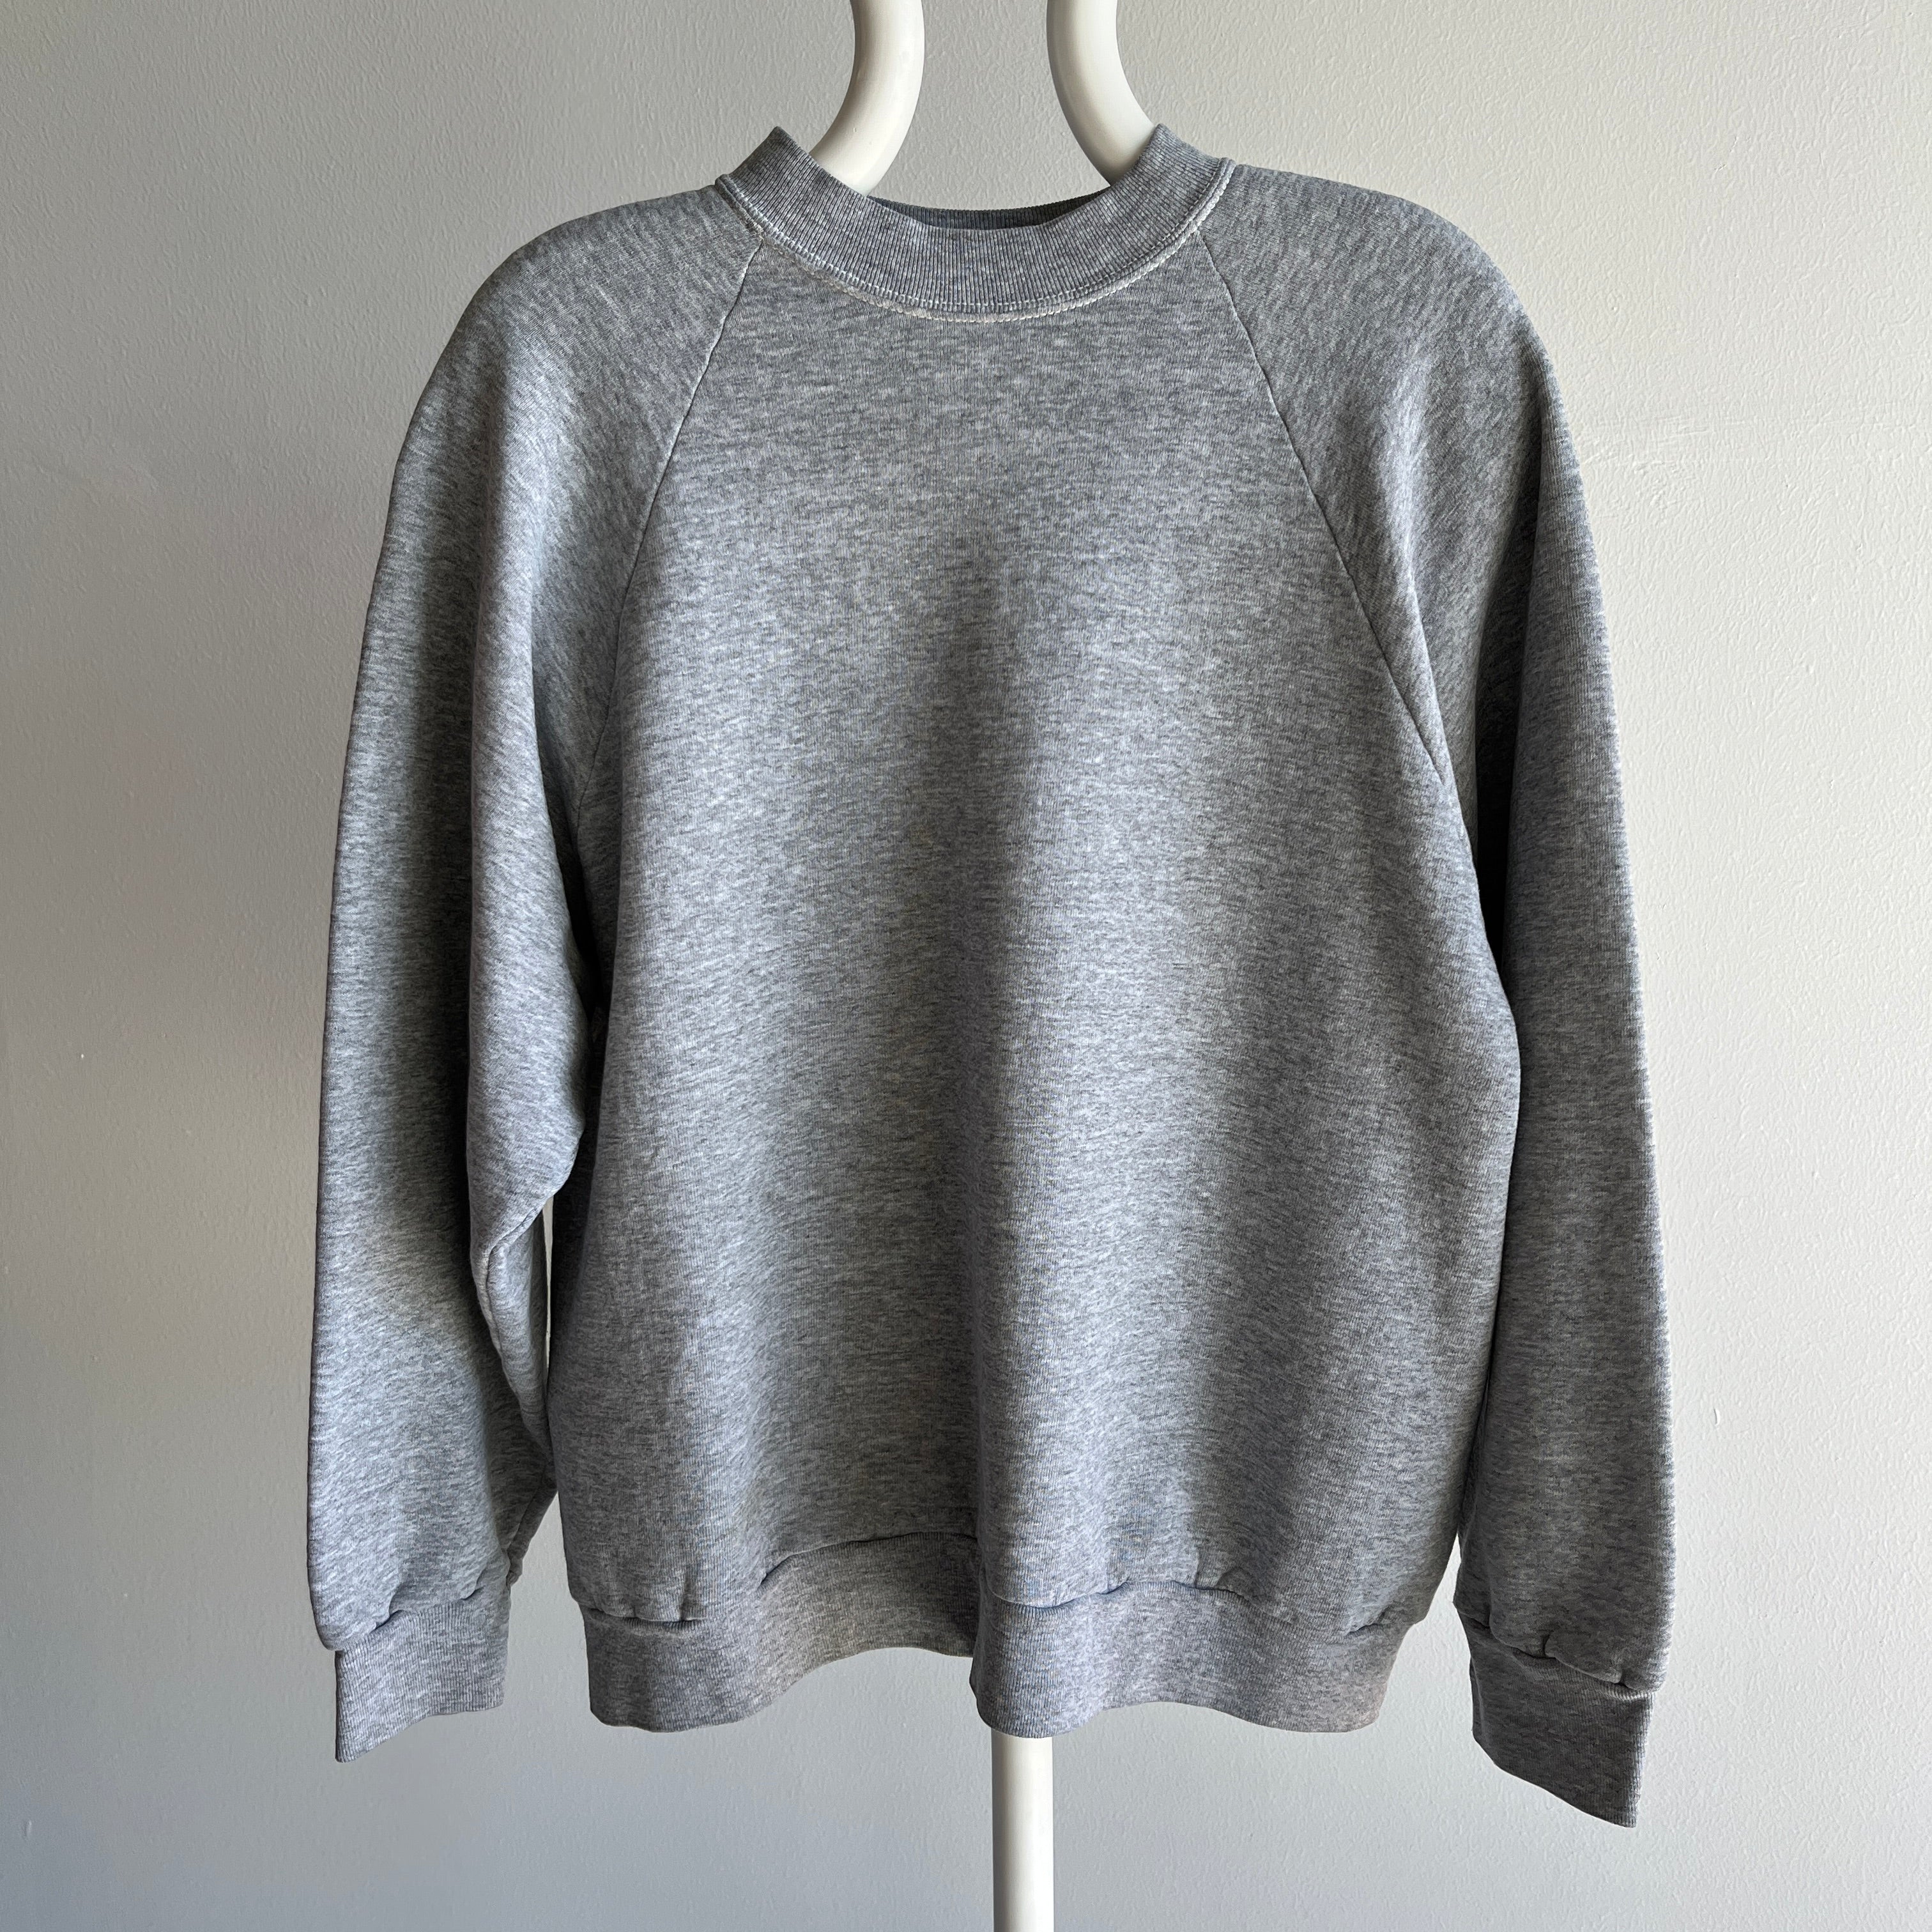 1980/90s Blank Gray Sweatshirt with Contrast White Stitching